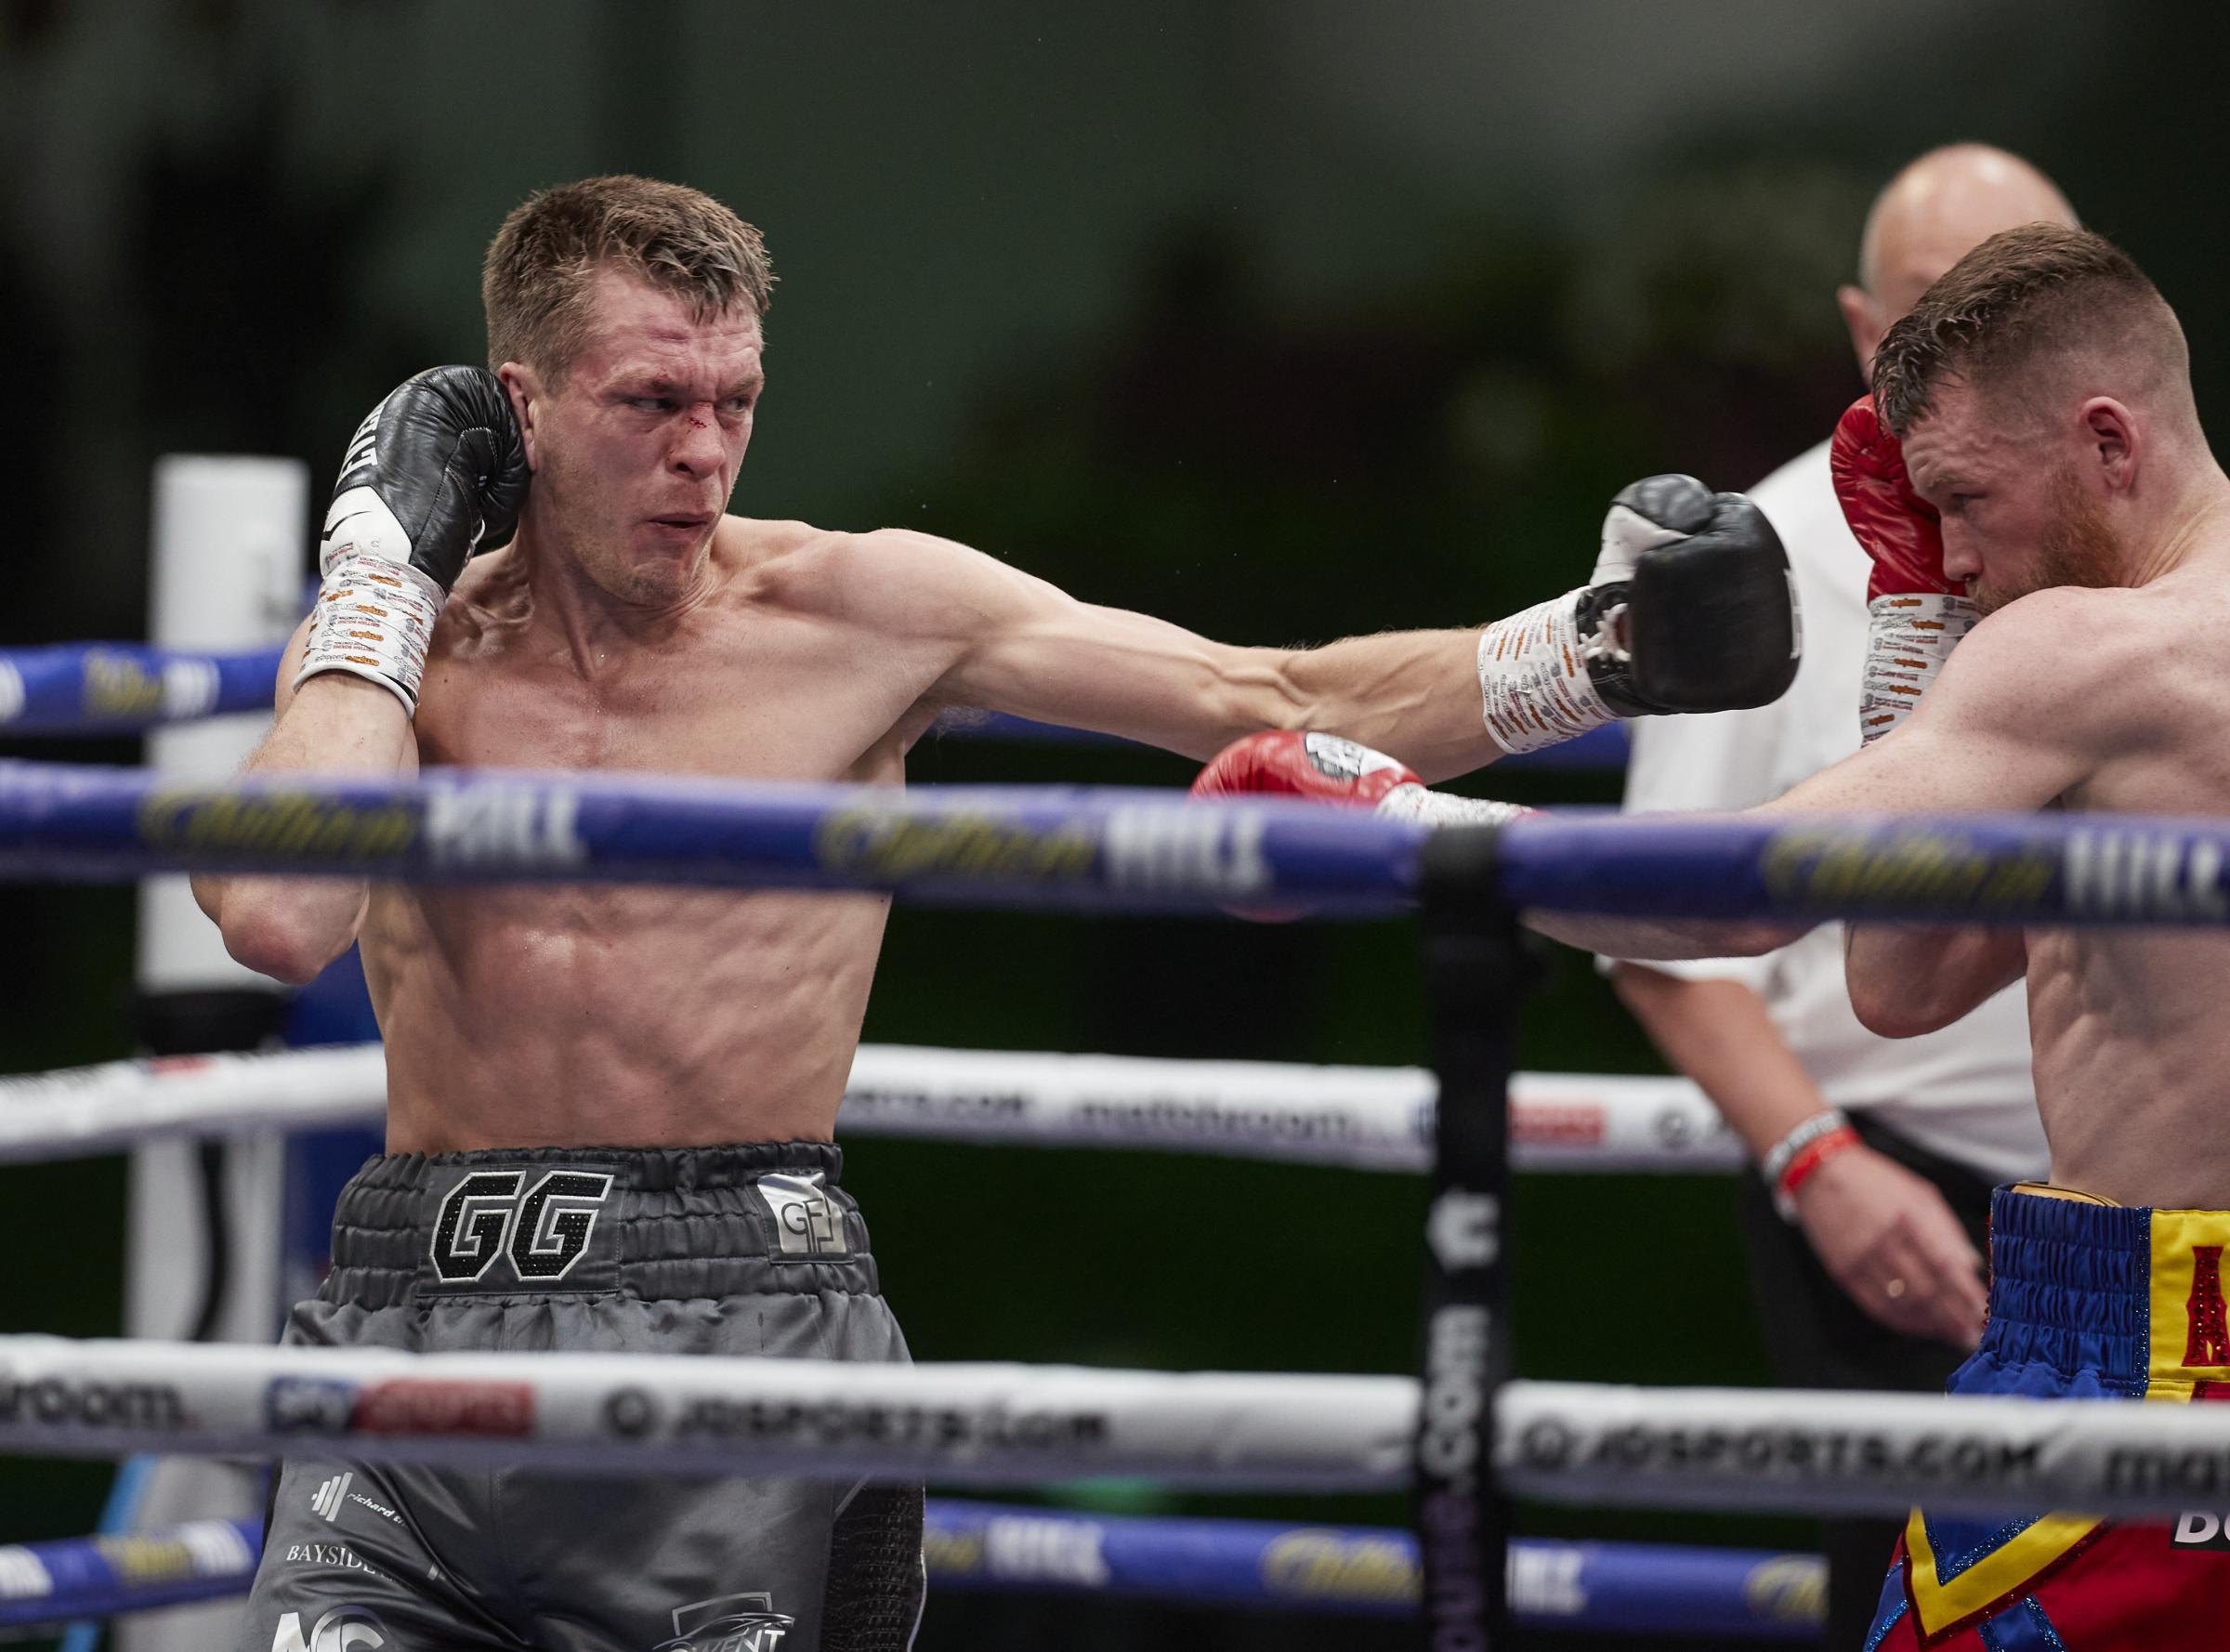 HANDOUT PICTURE COMPLIMENTS OF MATCHROOM BOXING.James Tennyson v Gavin Gwynne, Vacant British Lightweight Title, Matchroom Fight Camp..1st August 2020..Picture By Mark Robinson.